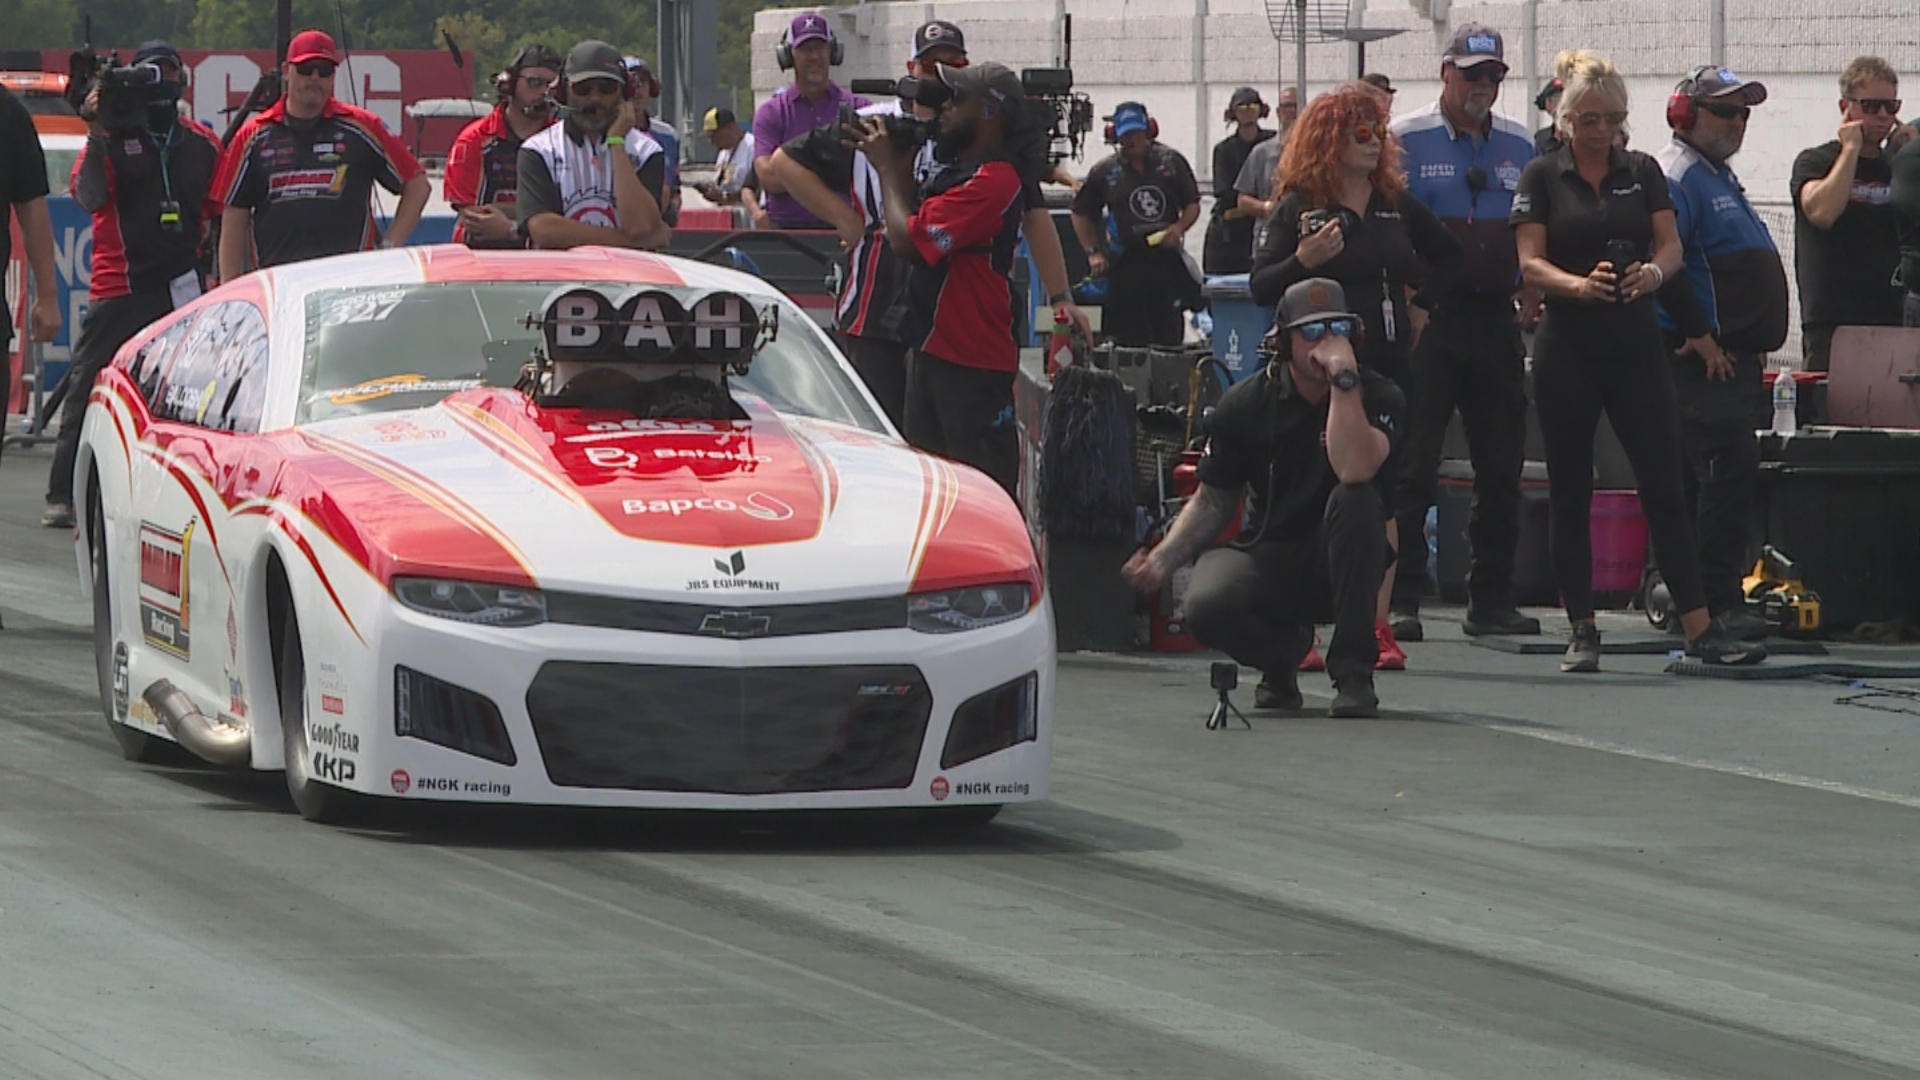 Labor Day drag racing thrills fans at Lucas Oil Indianapolis Raceway Park